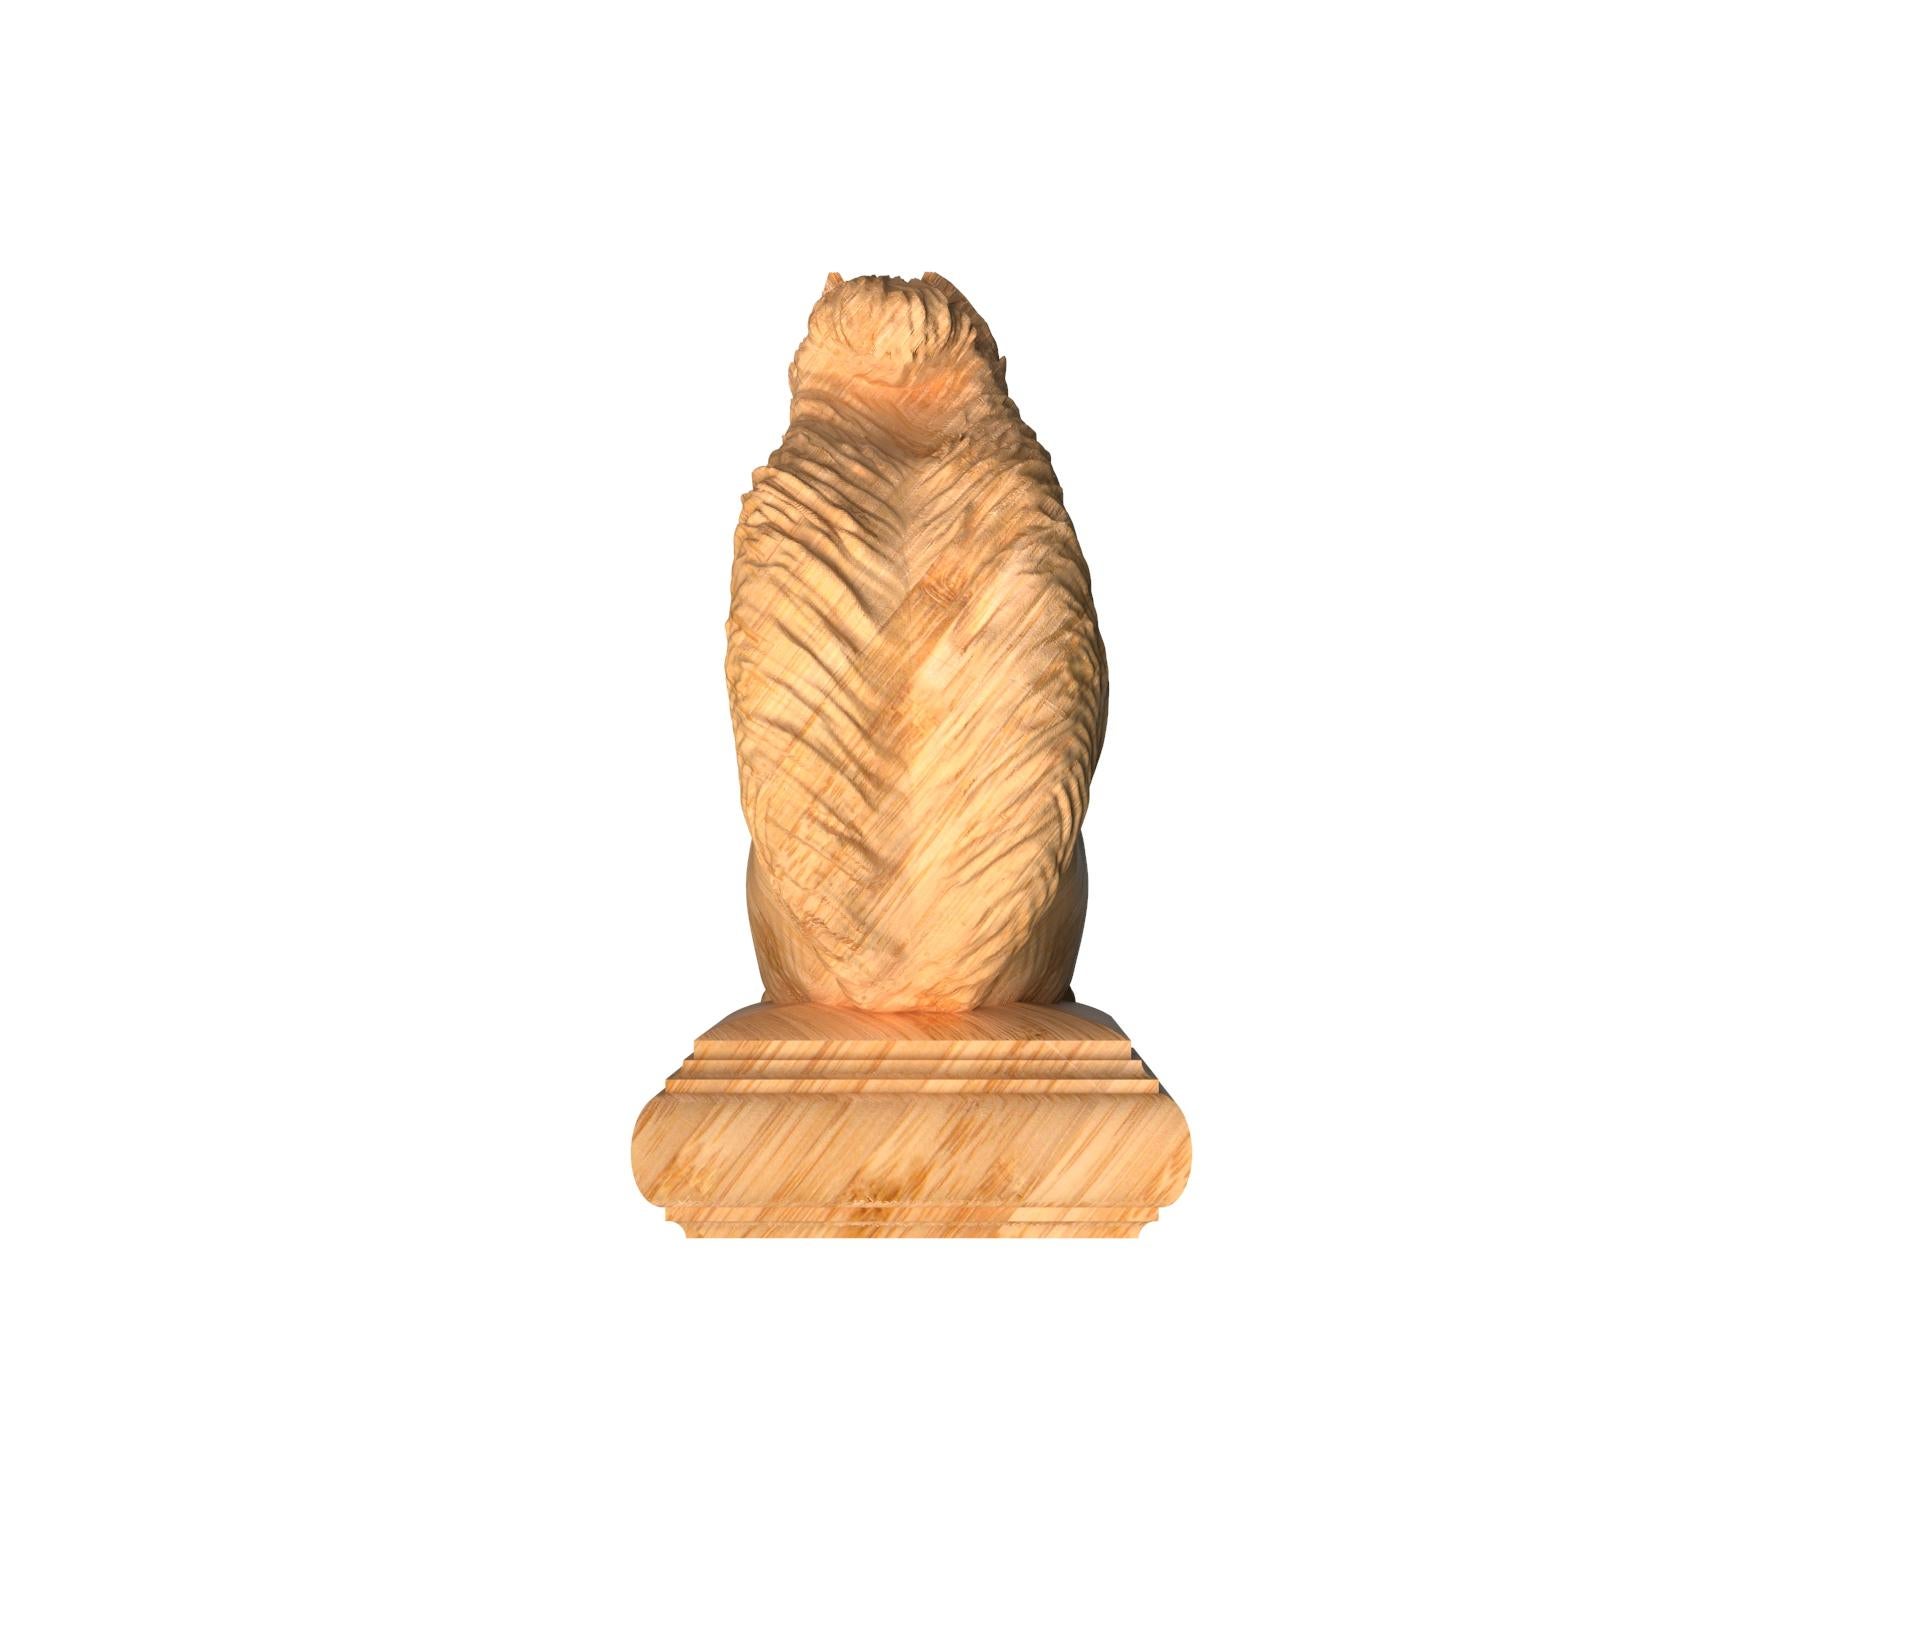 Contemporary Wooden Carved Squirrel Finial. Handcrafted Stairs Decoration, Oak Newel Post Cap For Sale